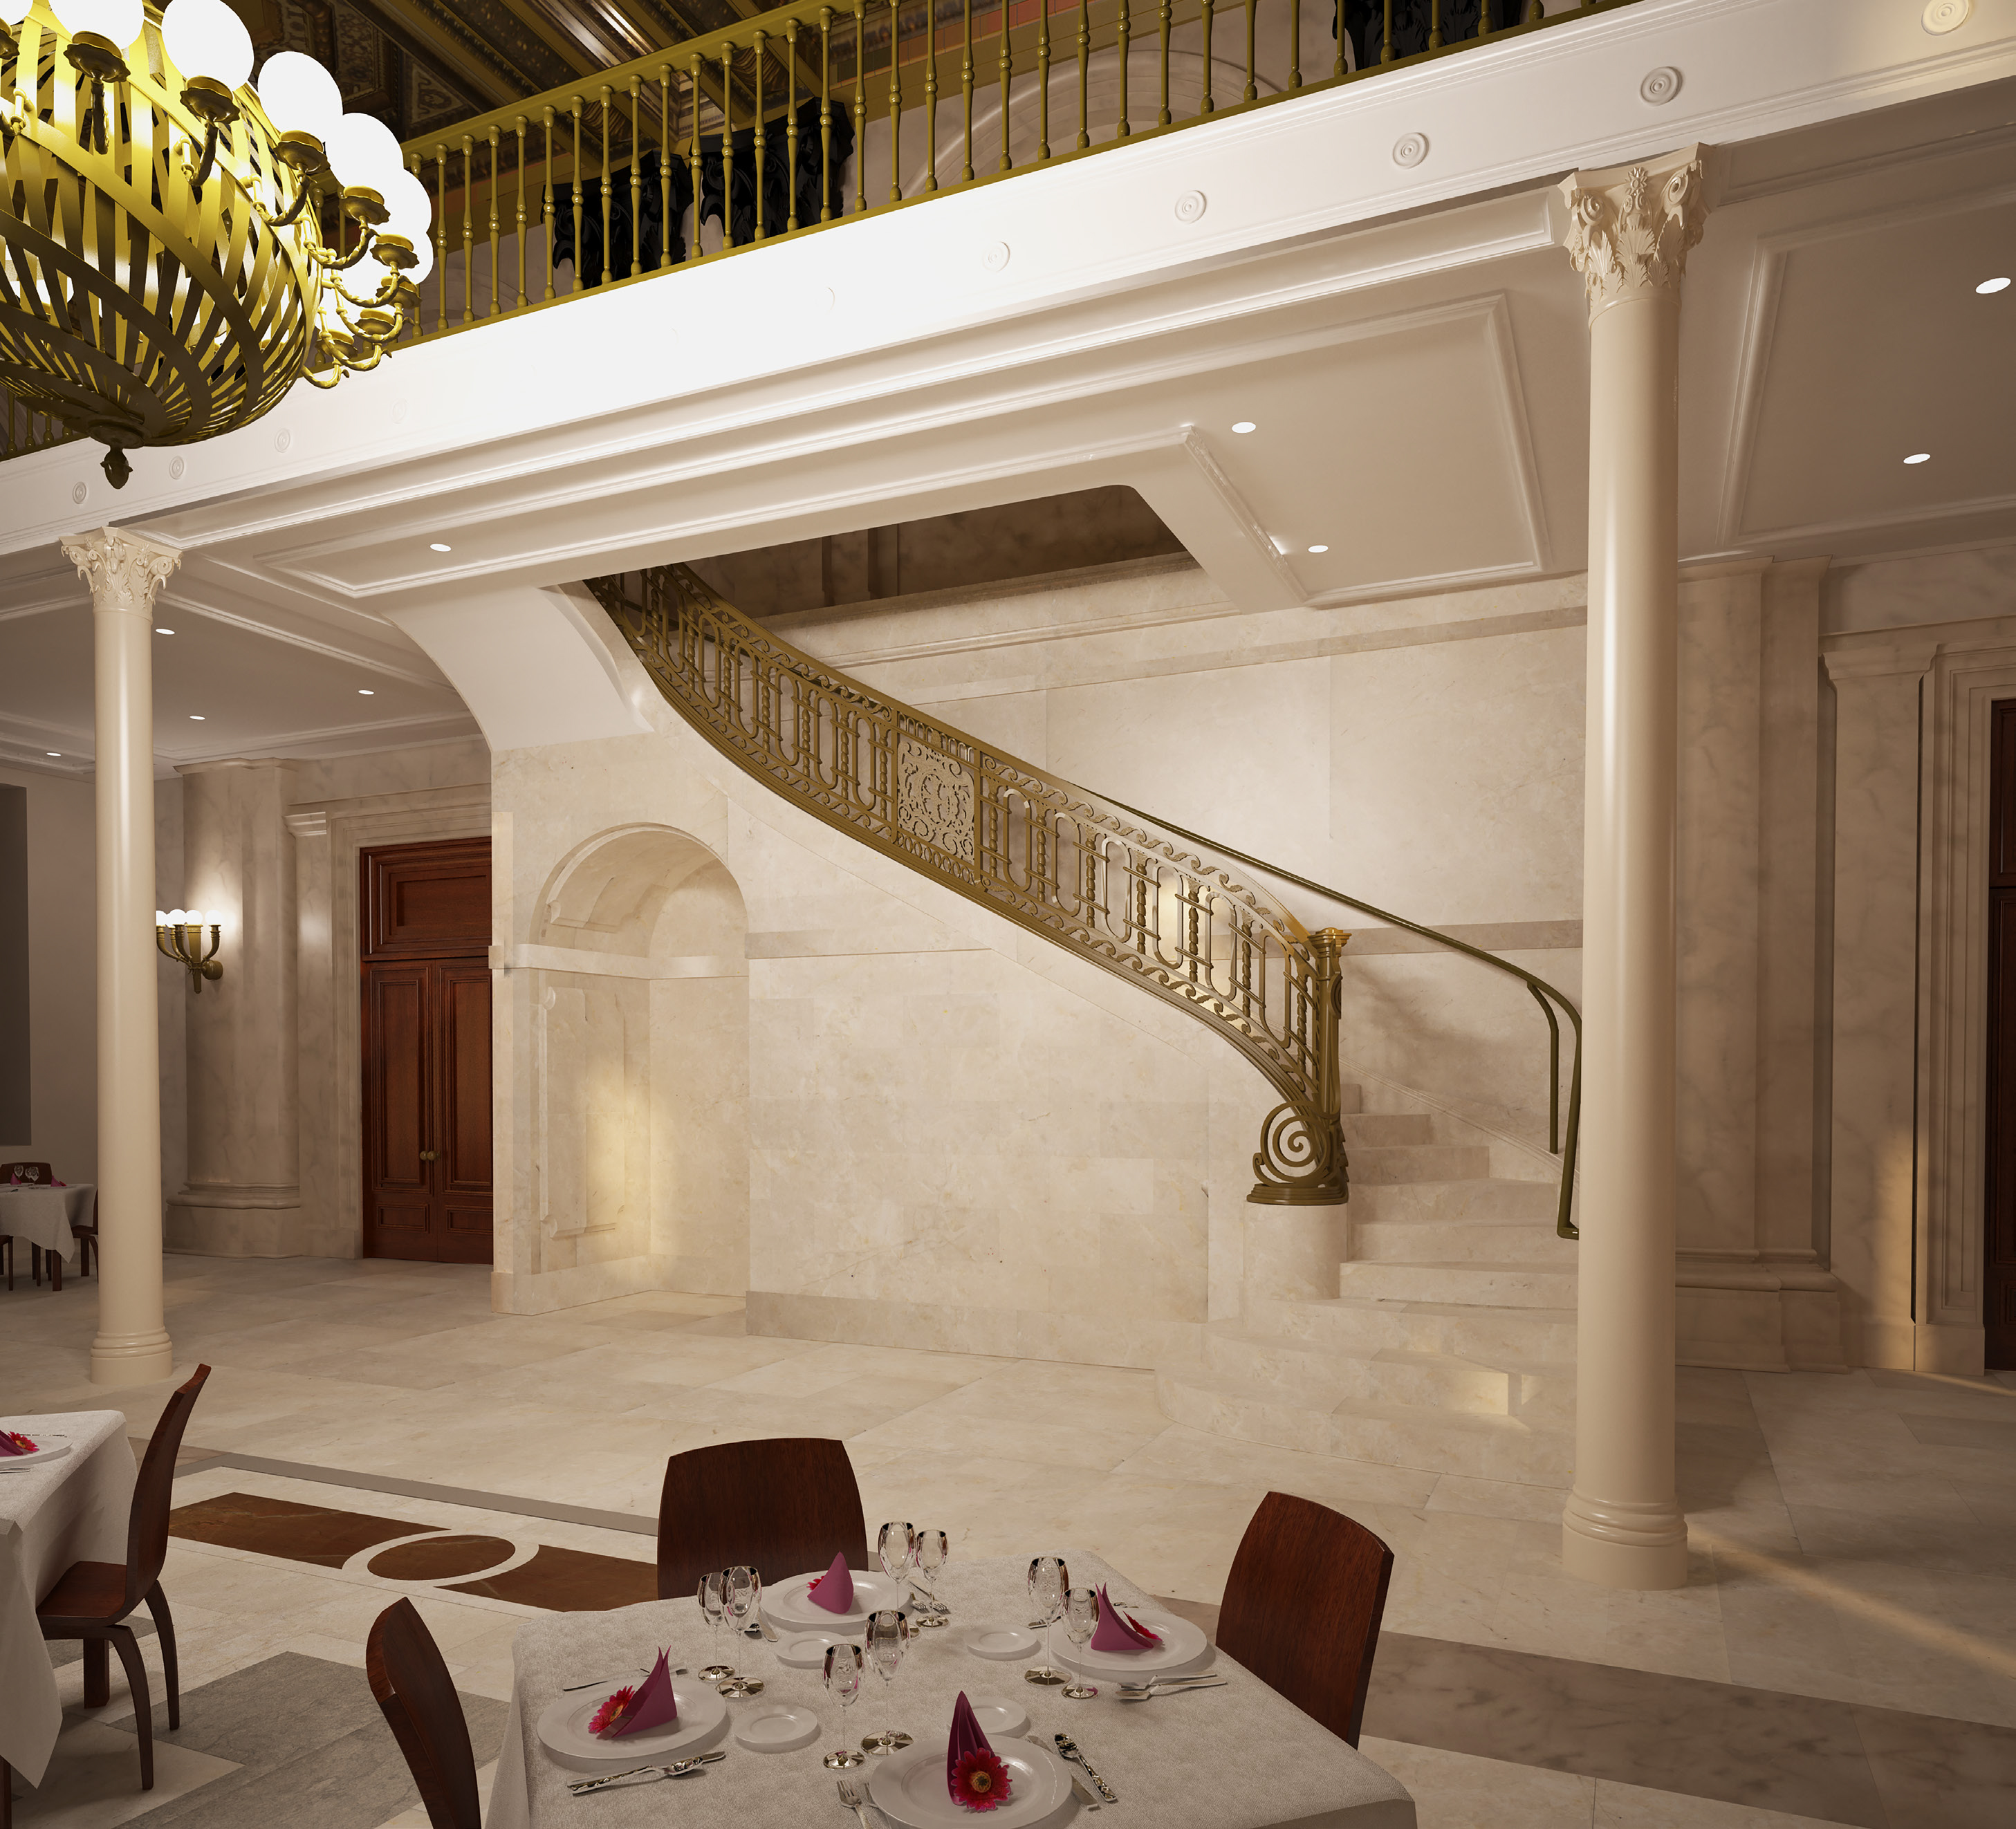 Close-up rendering of the stairs in the renovated banking hall at 346 Broadway